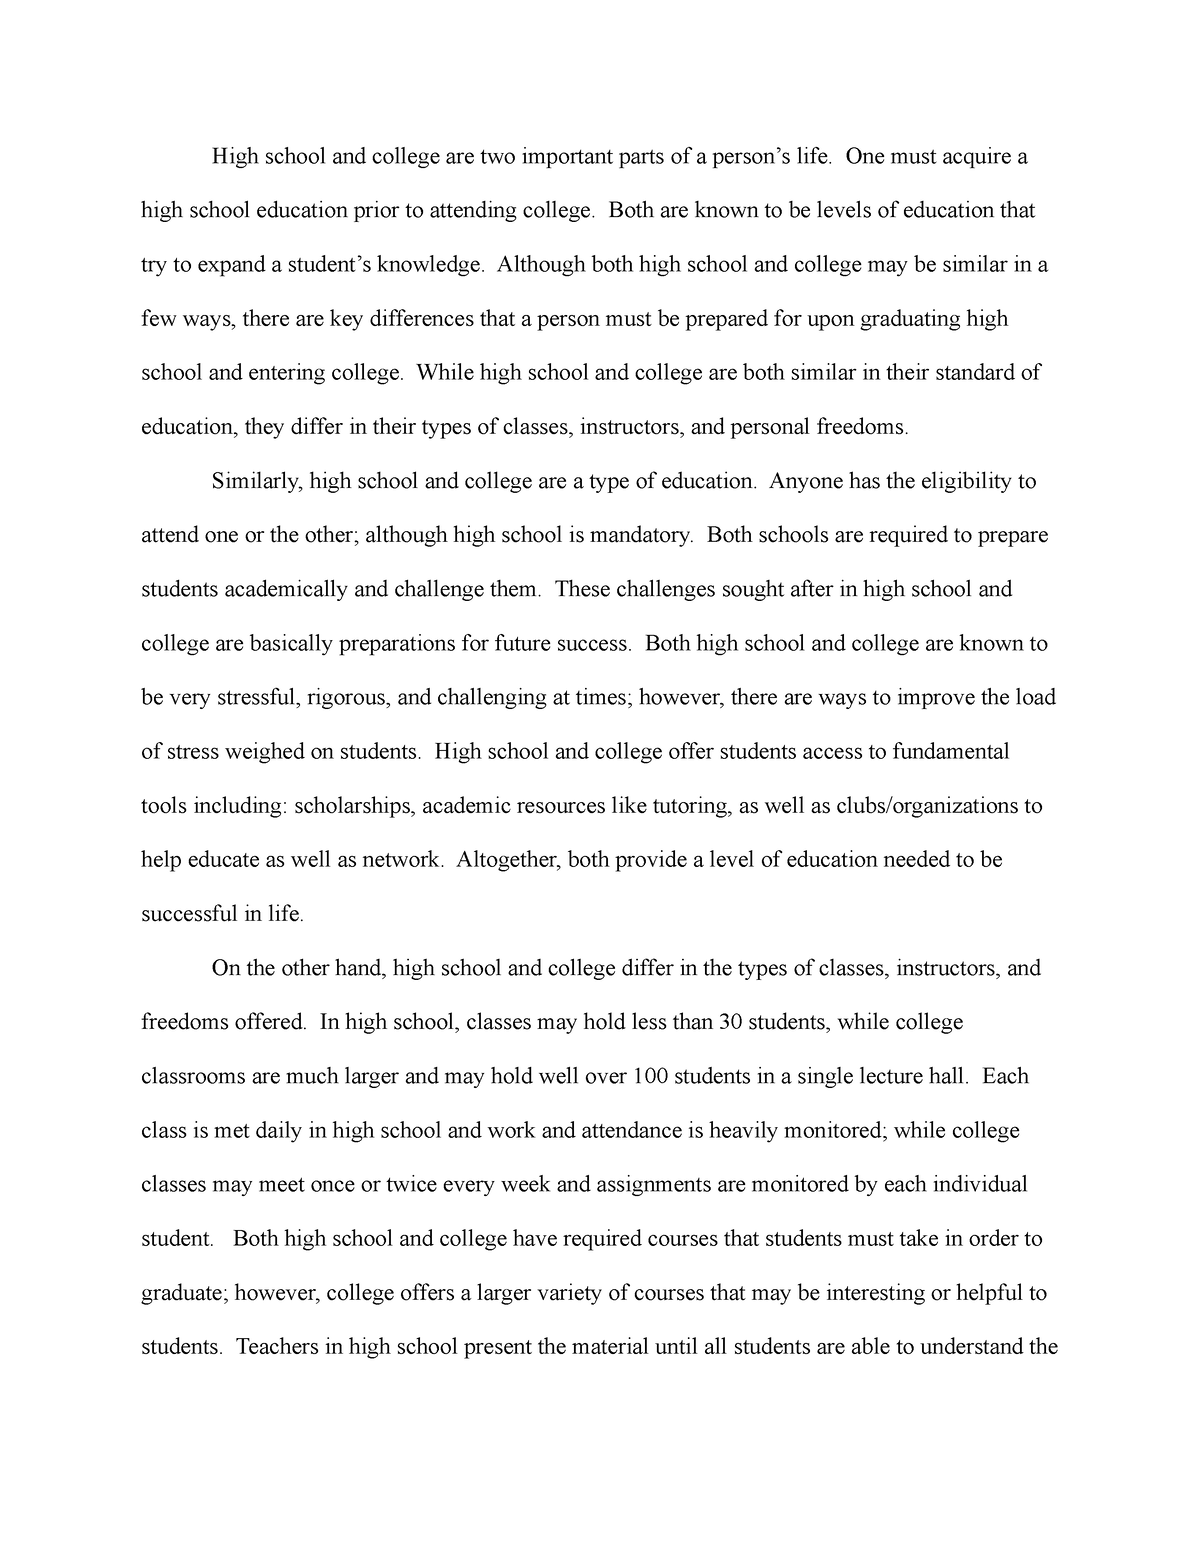 comparison essay about high school and university